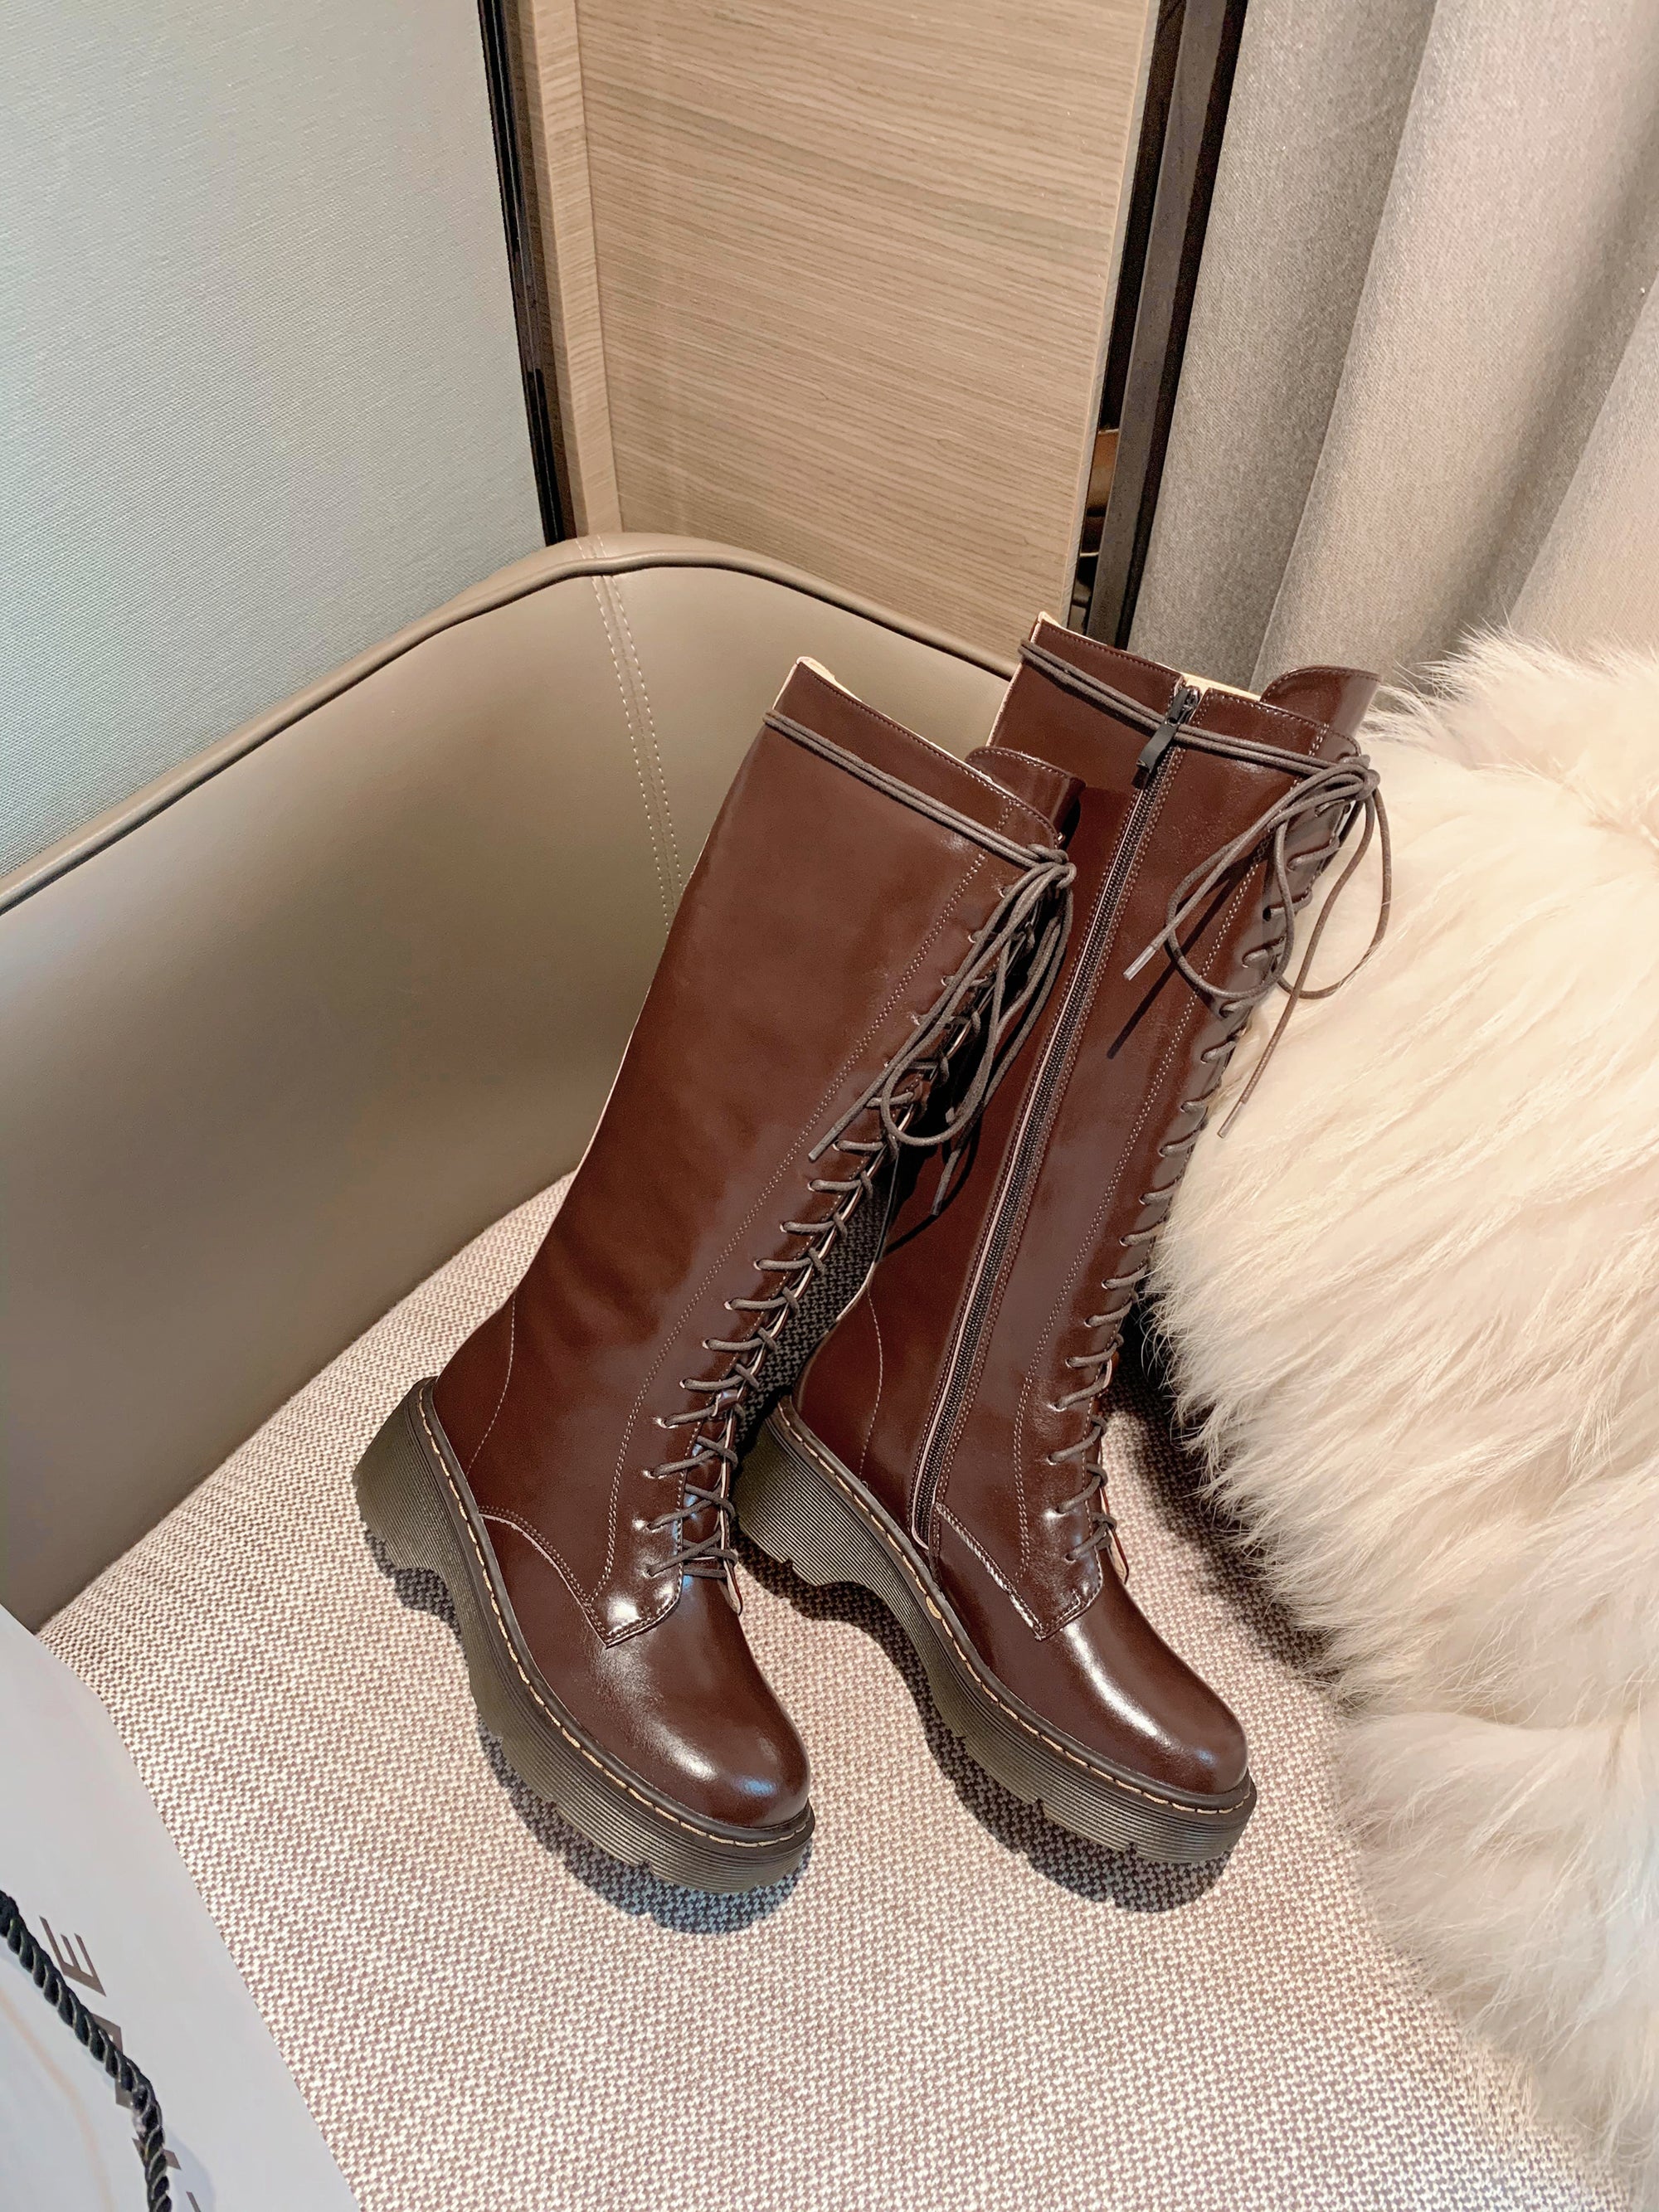 Bigsizeheels Horse oil leather + lamb hair stovepipe boots freeshipping - bigsizeheel®-size5-size15 -All Plus Sizes Available!